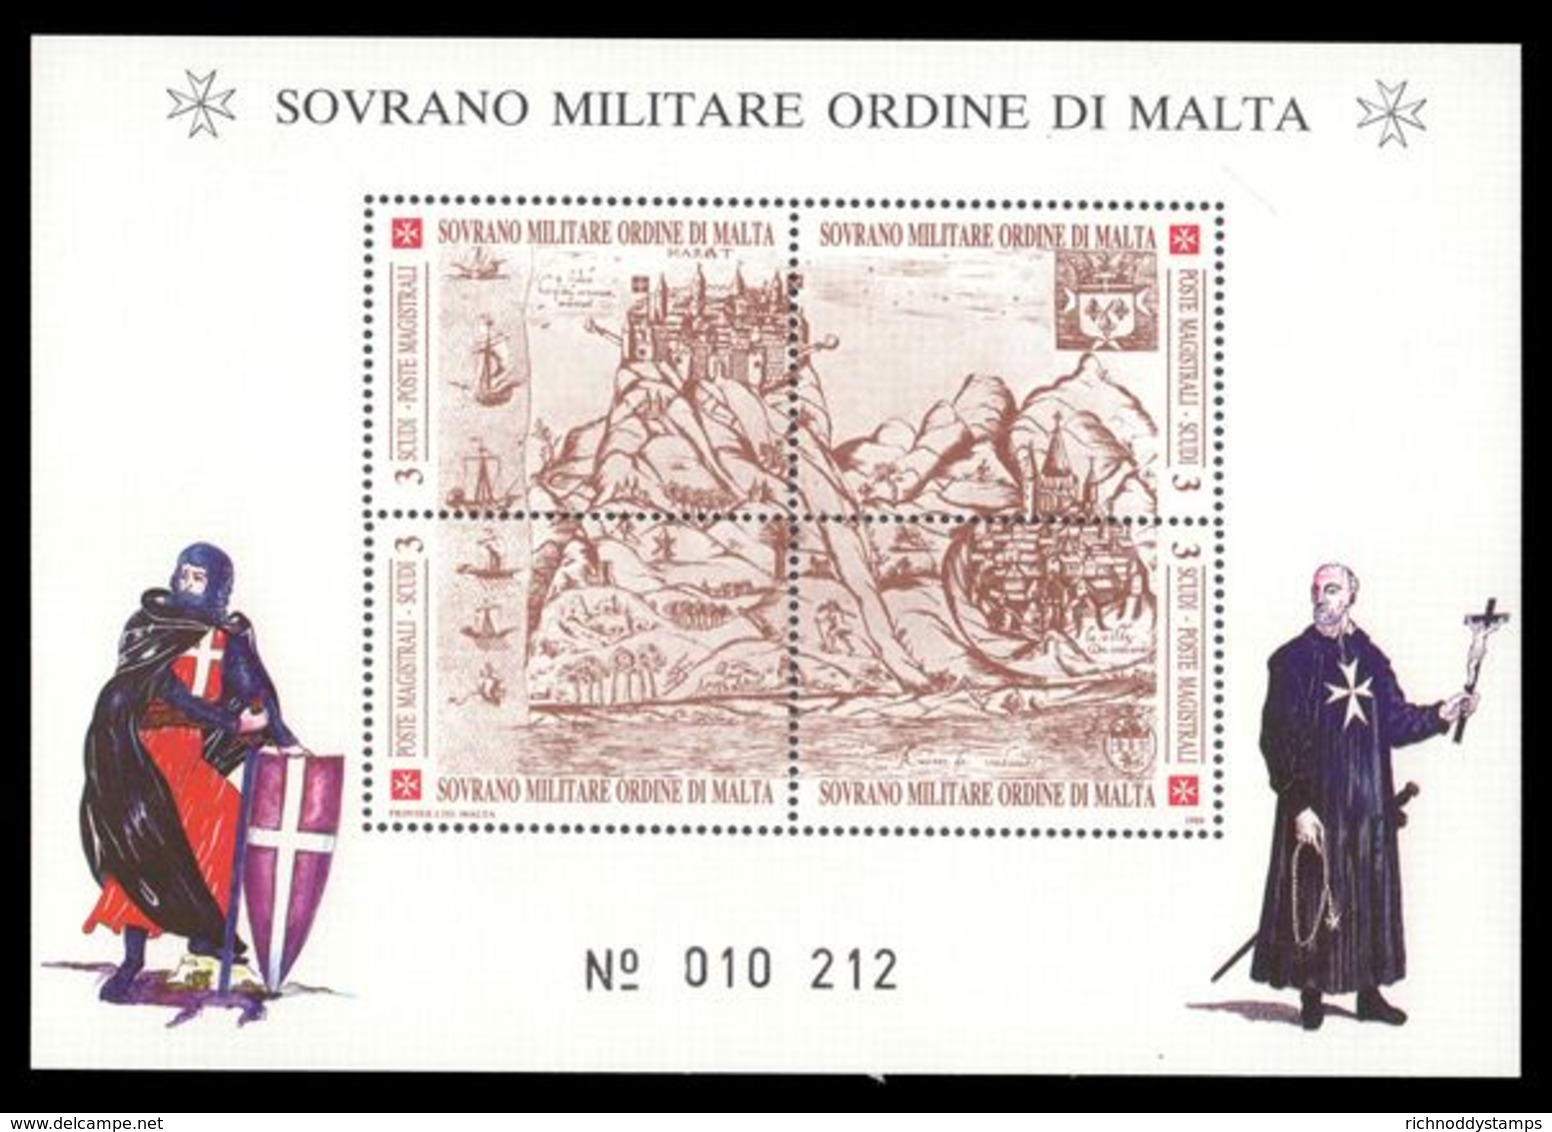 Sovereign Military Order Of Malta 1990 Forts And Castles Of The Order Souvenir Sheet Unmounted Mint. - Malte (Ordre De)